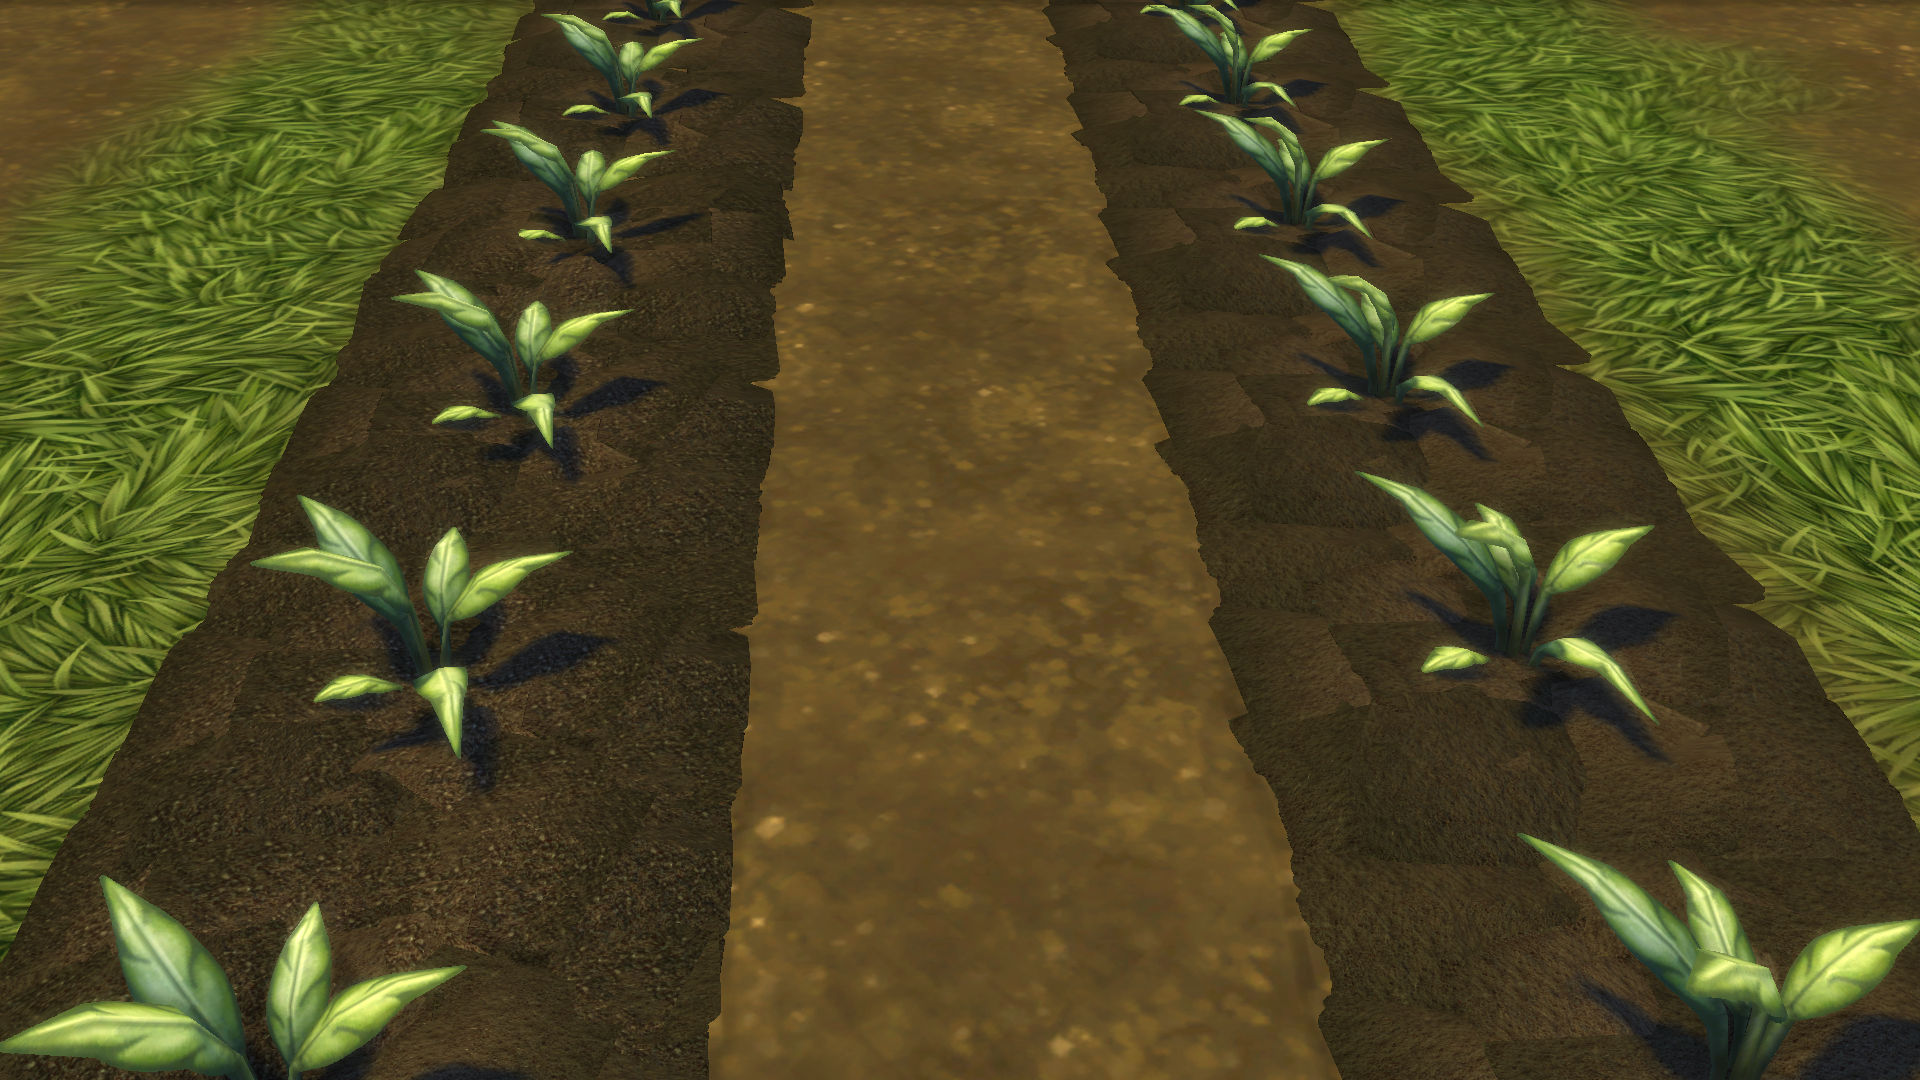 Mod The Sims Farm And Orchard Raised Row Gardening Soil Squares